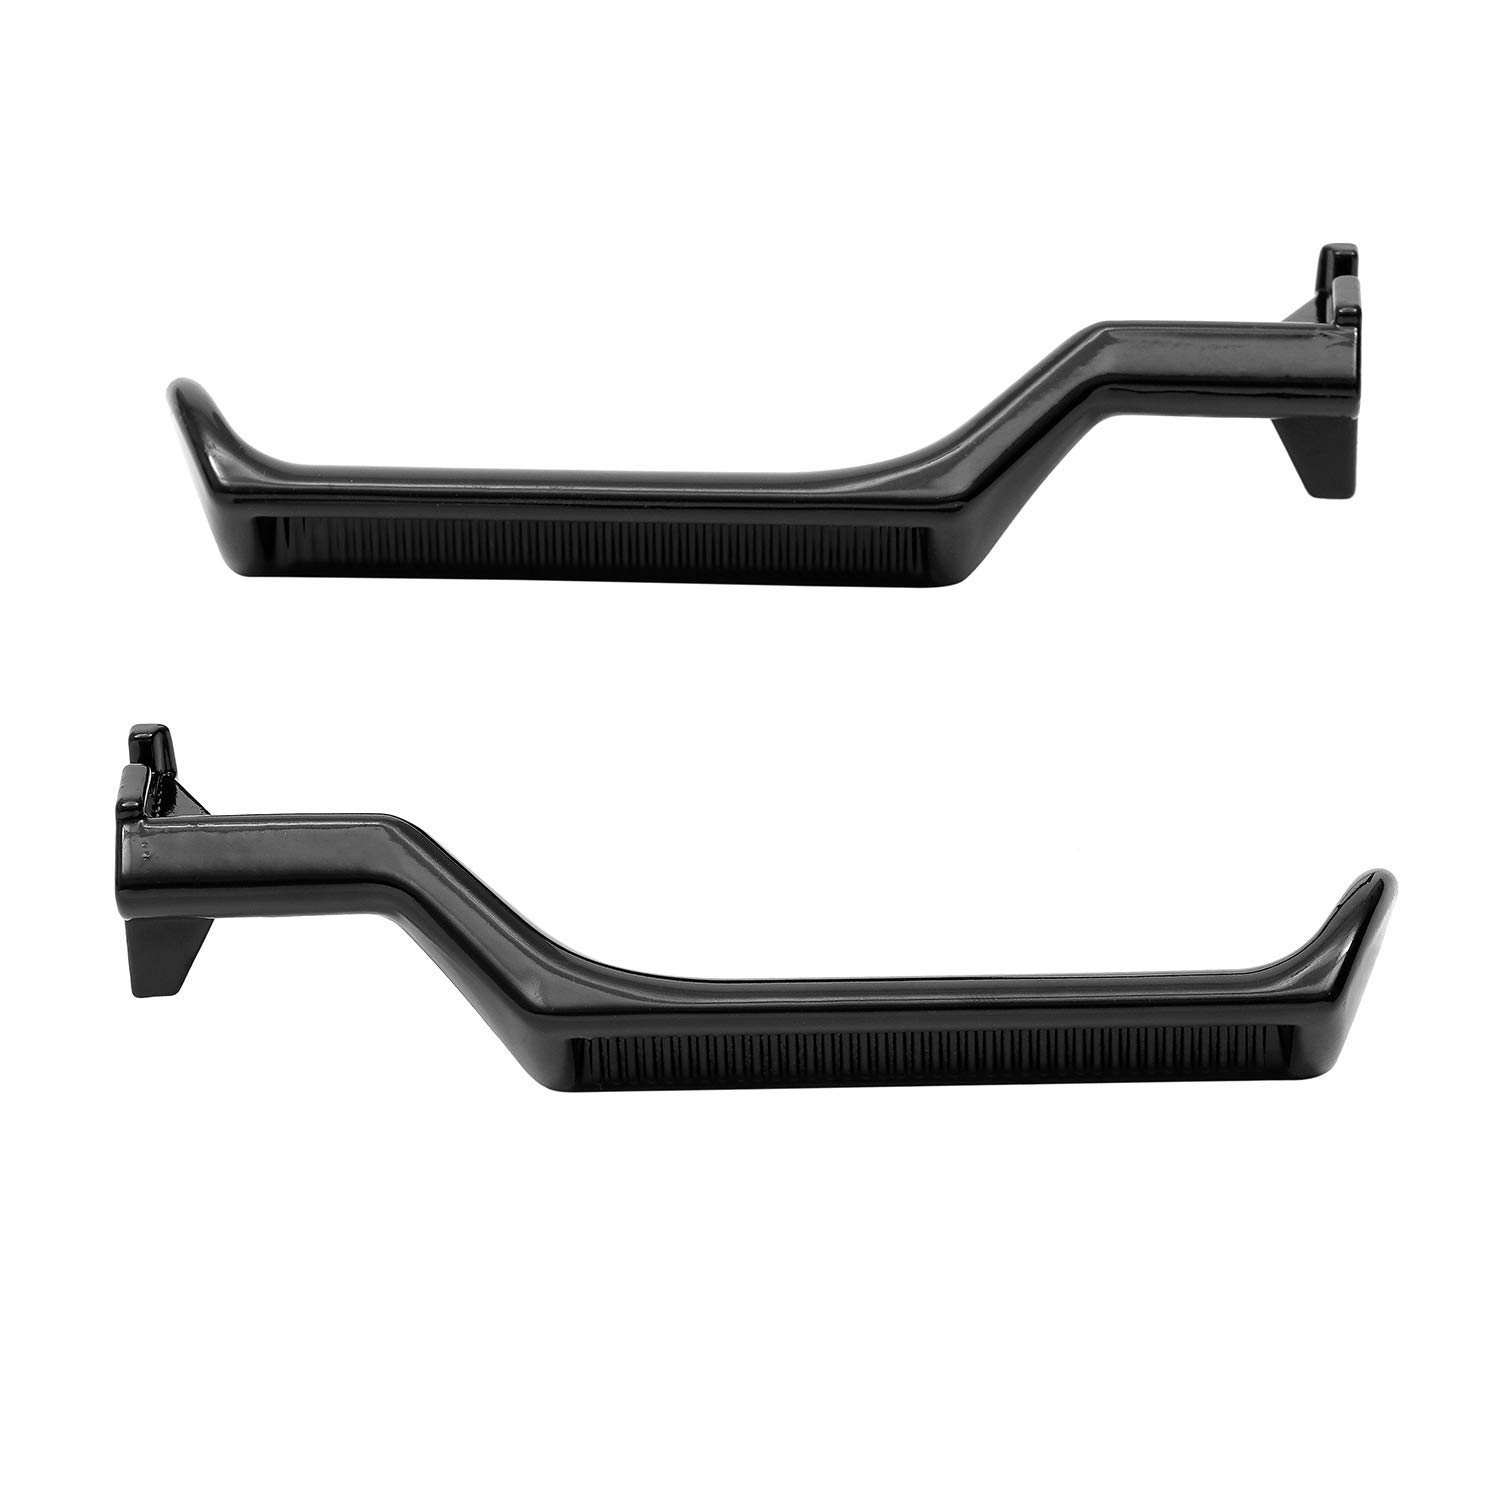 Interior Door Handle All Metal Front Rear Left Driver & Passenger Side Pair | Replacement for 1987-1996 Ford Bronco F150 F250 F350 F53 F59 F800 | Replaces# E7TZ-1522601-A, E7TZ-1522600-A, 77177, 77178